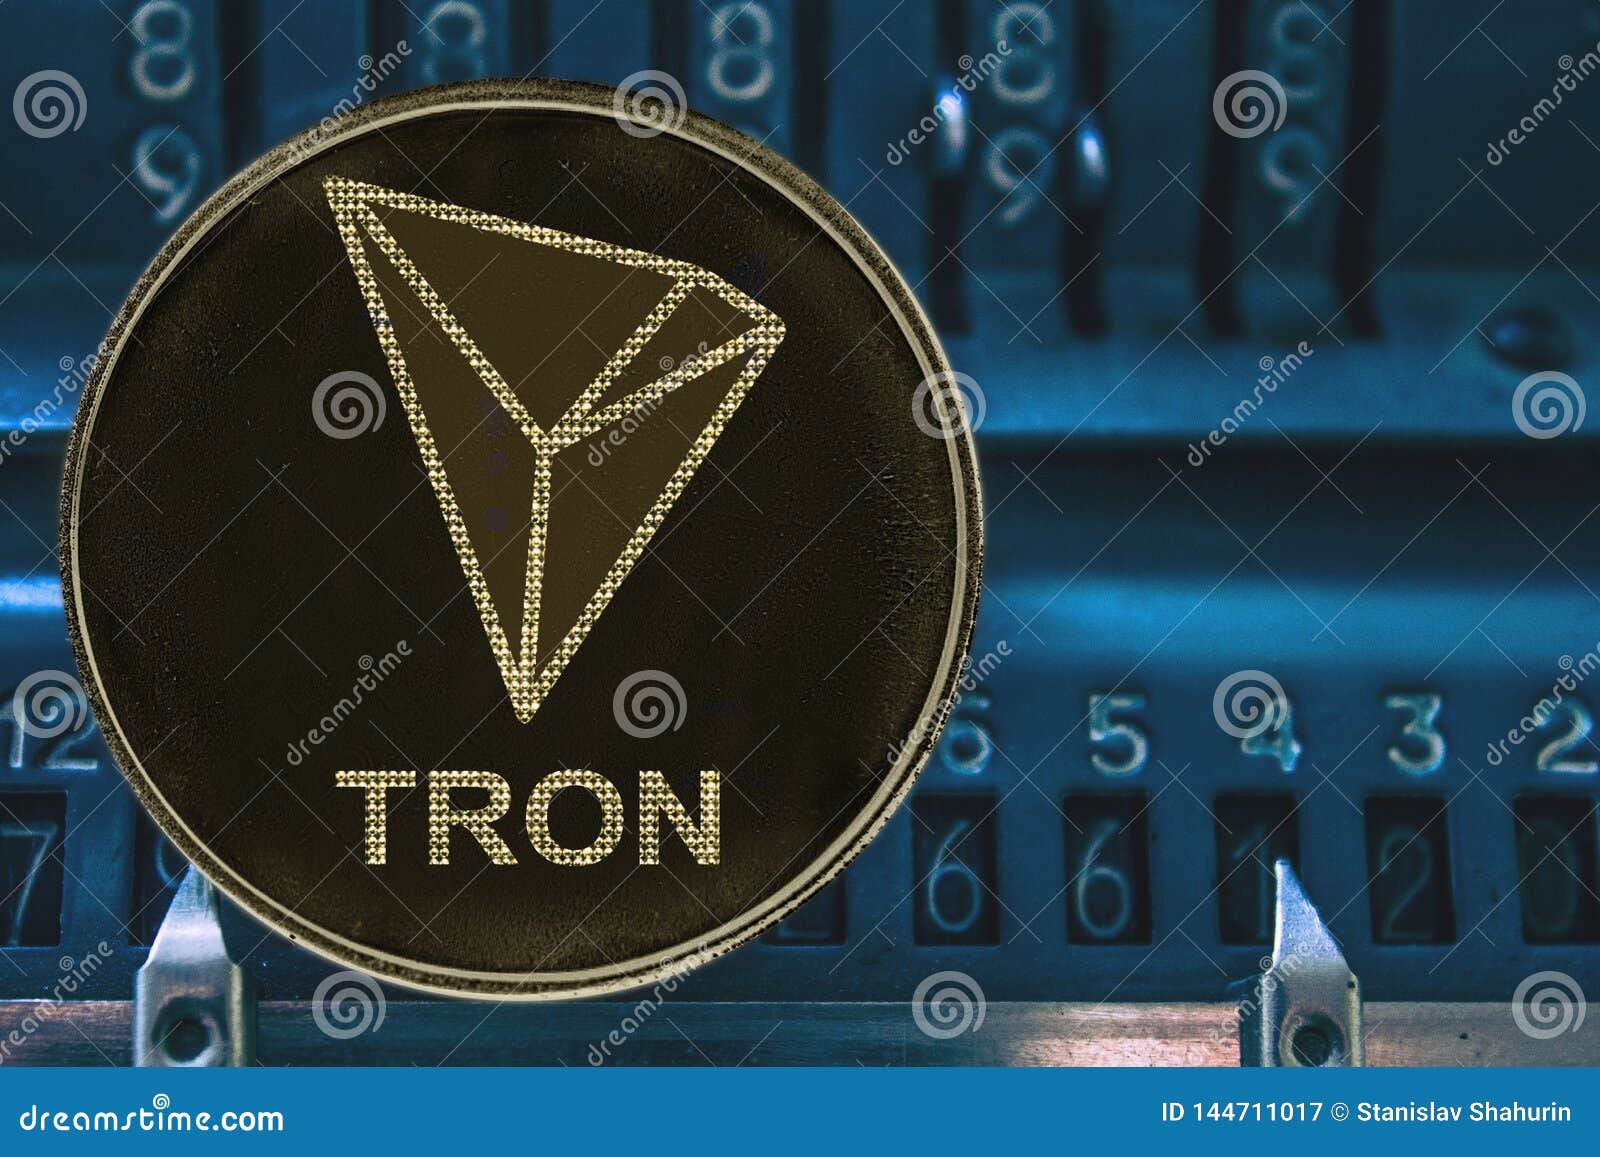 Token Cryptocurrency Tron TRX Against The Numbers Of The ...